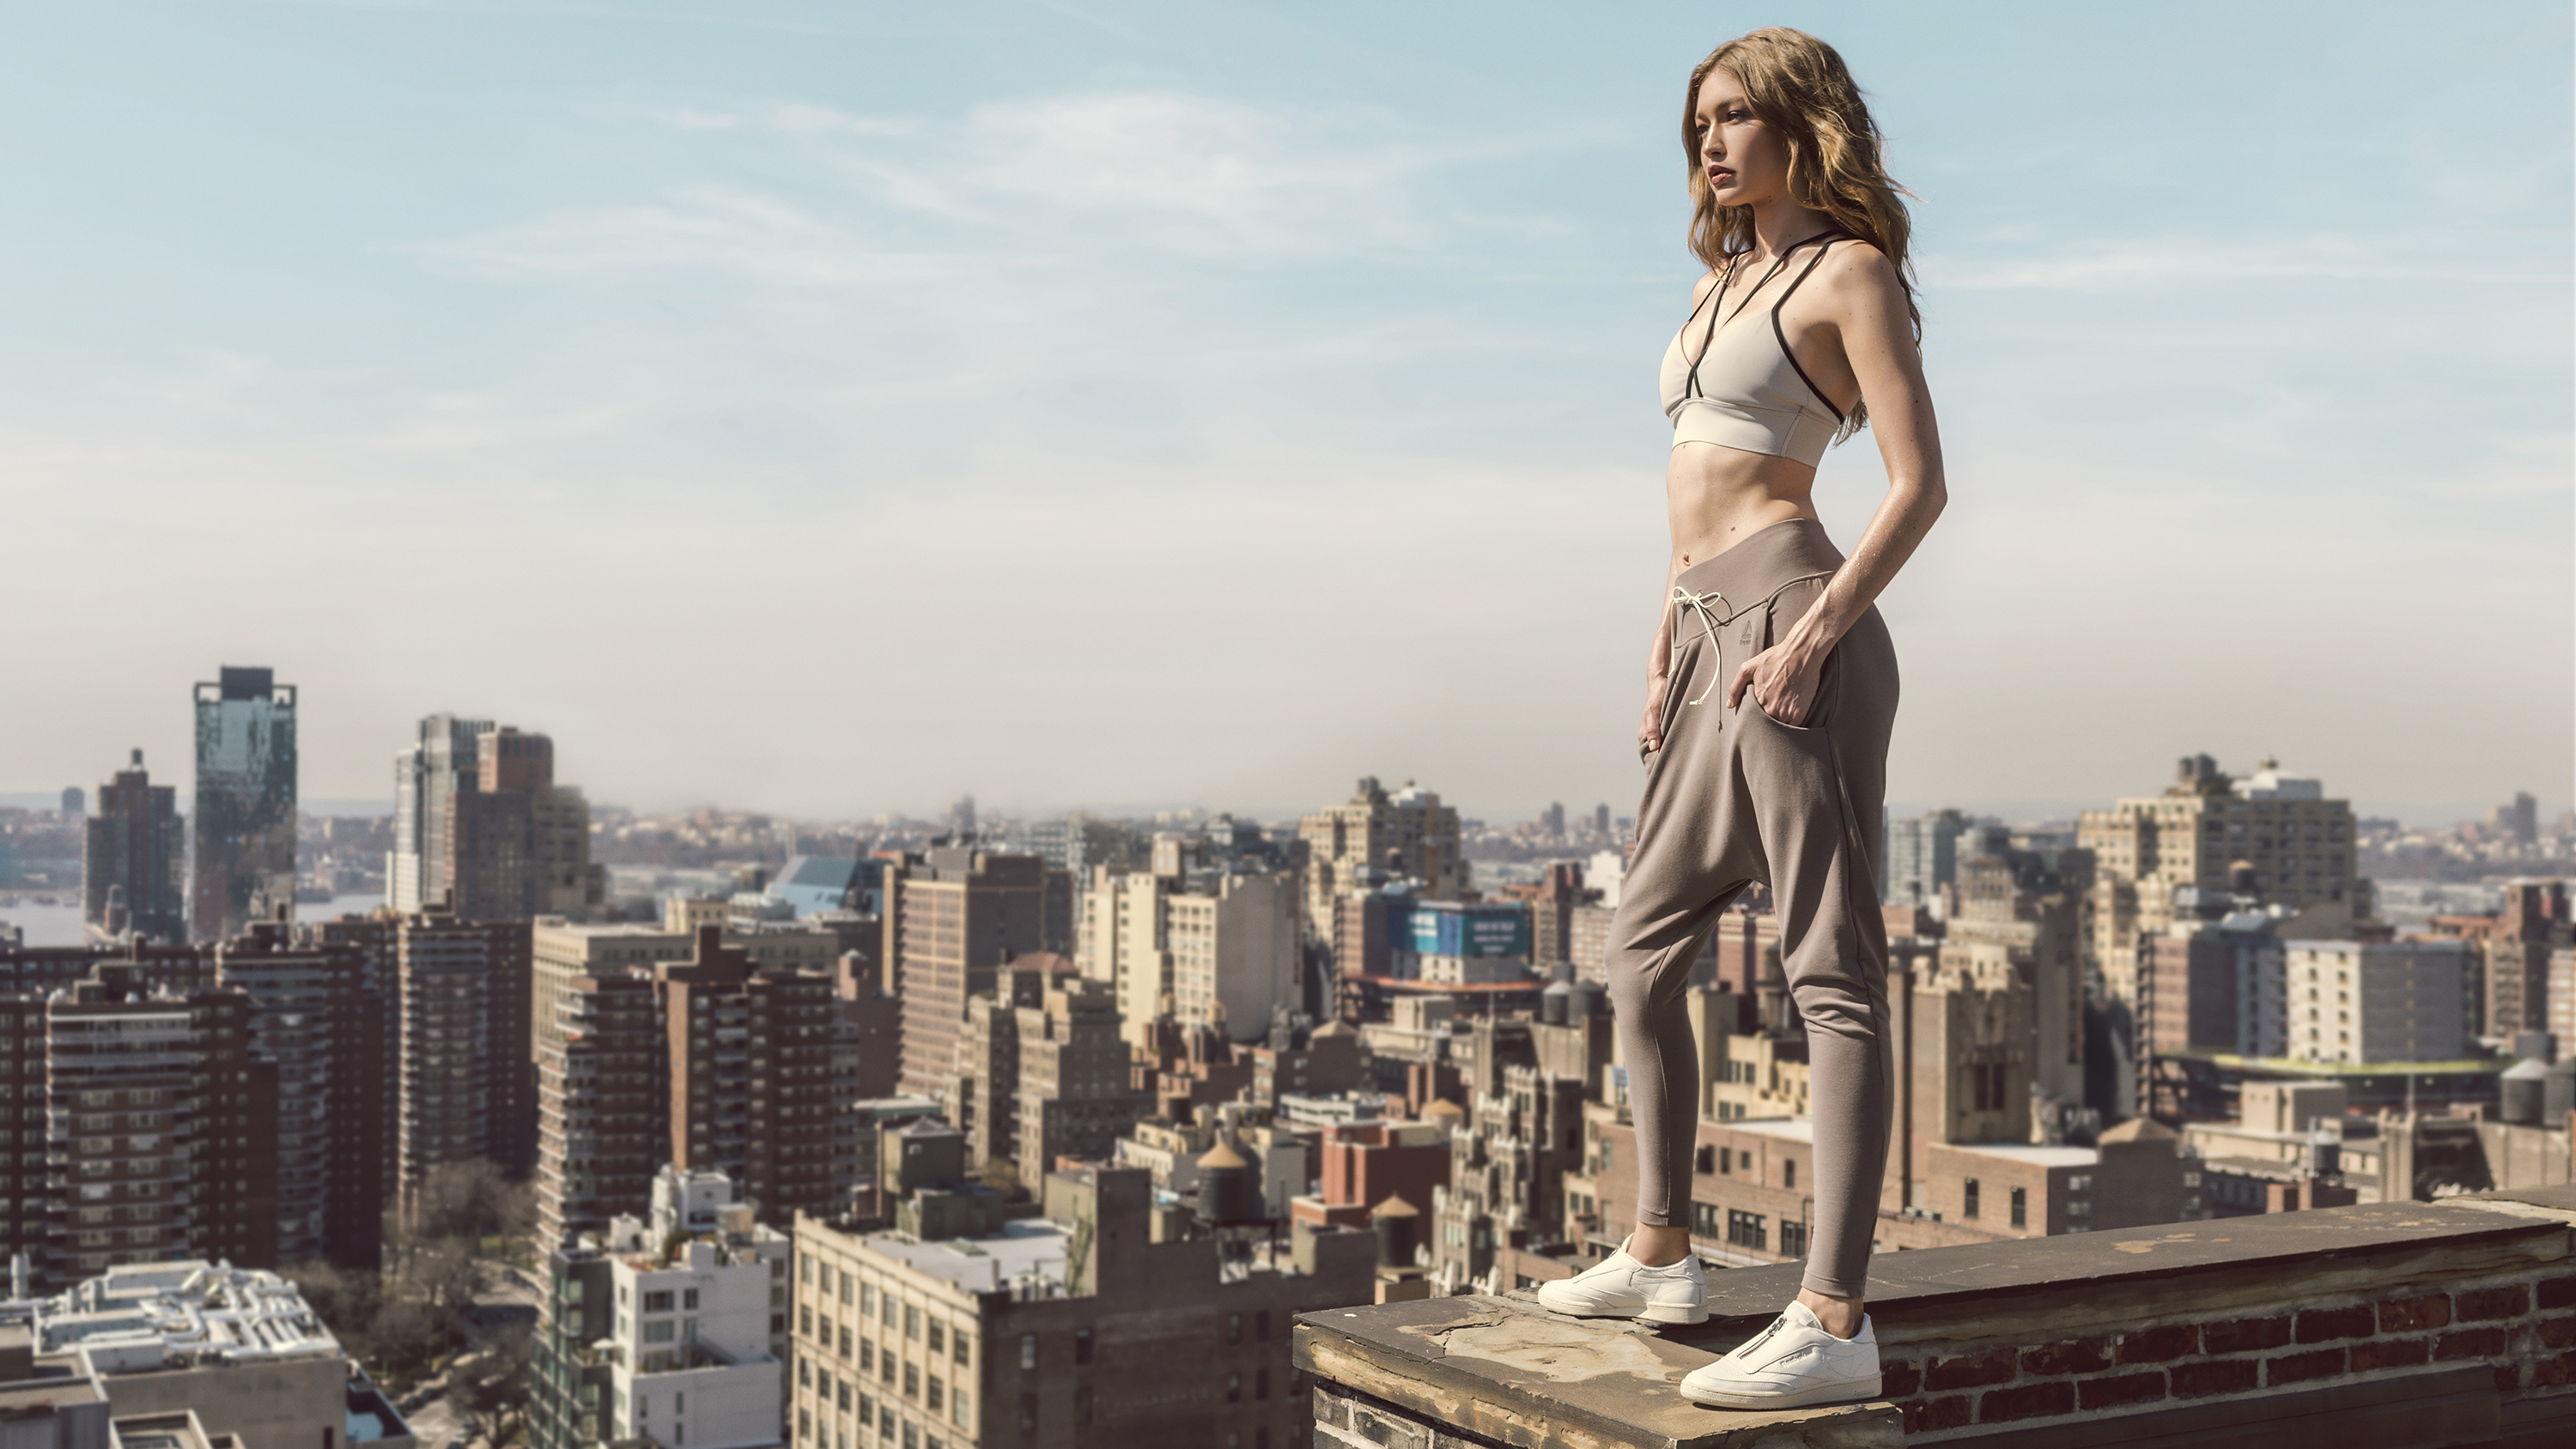 Gigi Hadid Model Celebrity Women People City White Shoes Blonde Looking Into The Distance Sneakers H 3000x1688